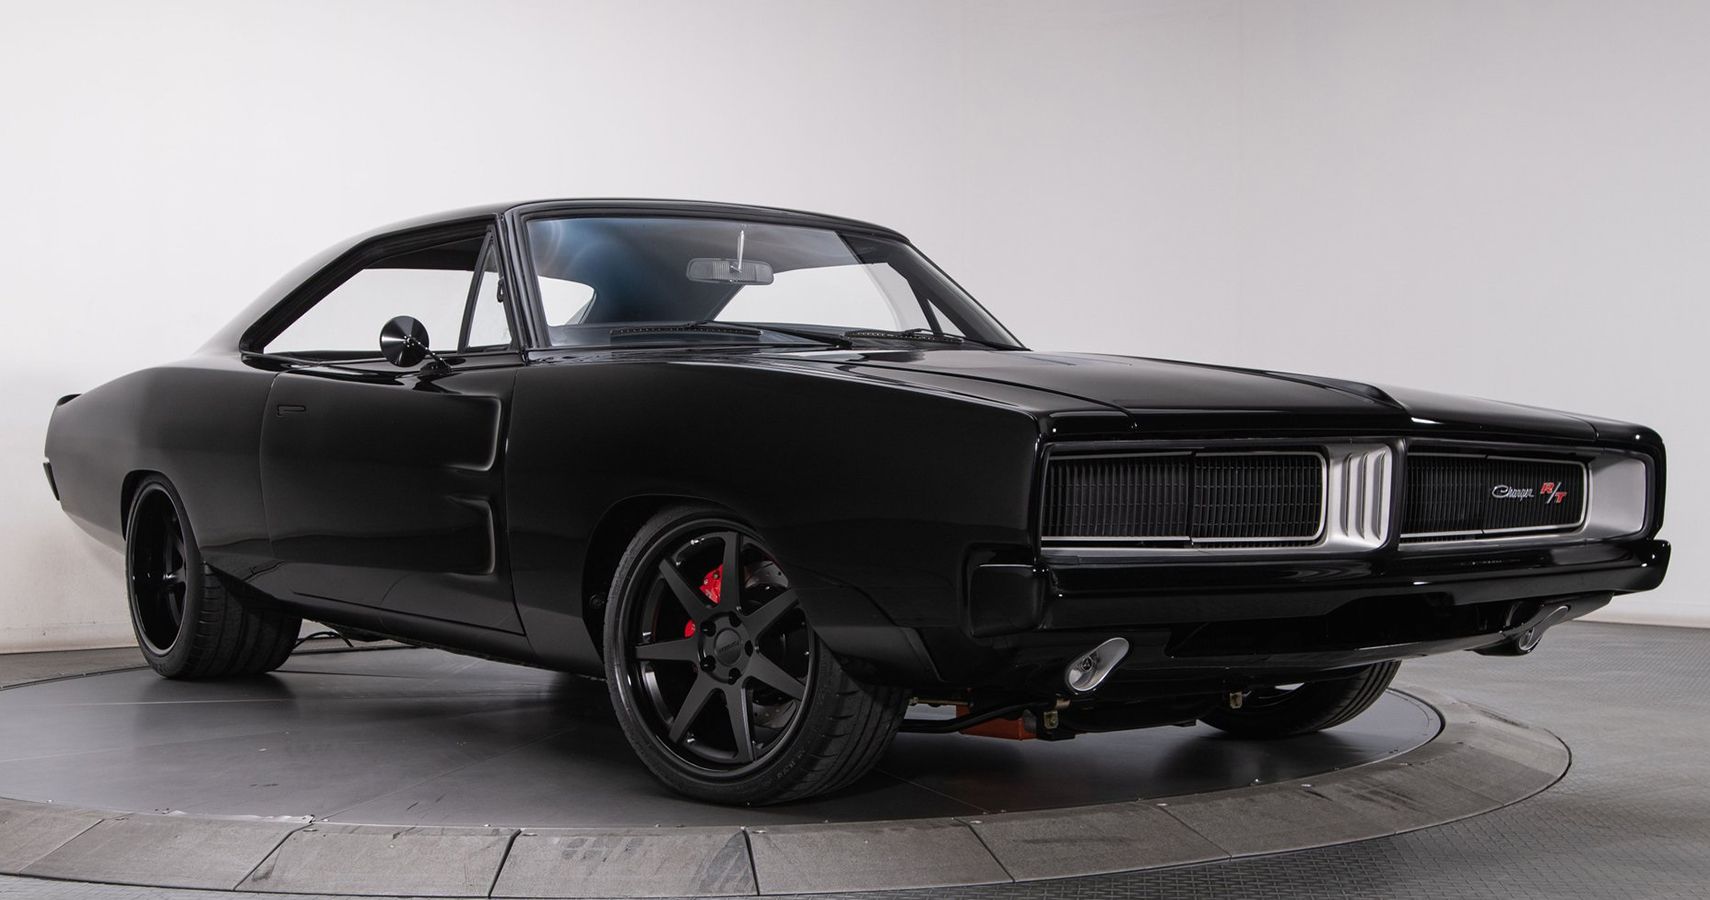 Ranking The Best Dodge Charger Generations